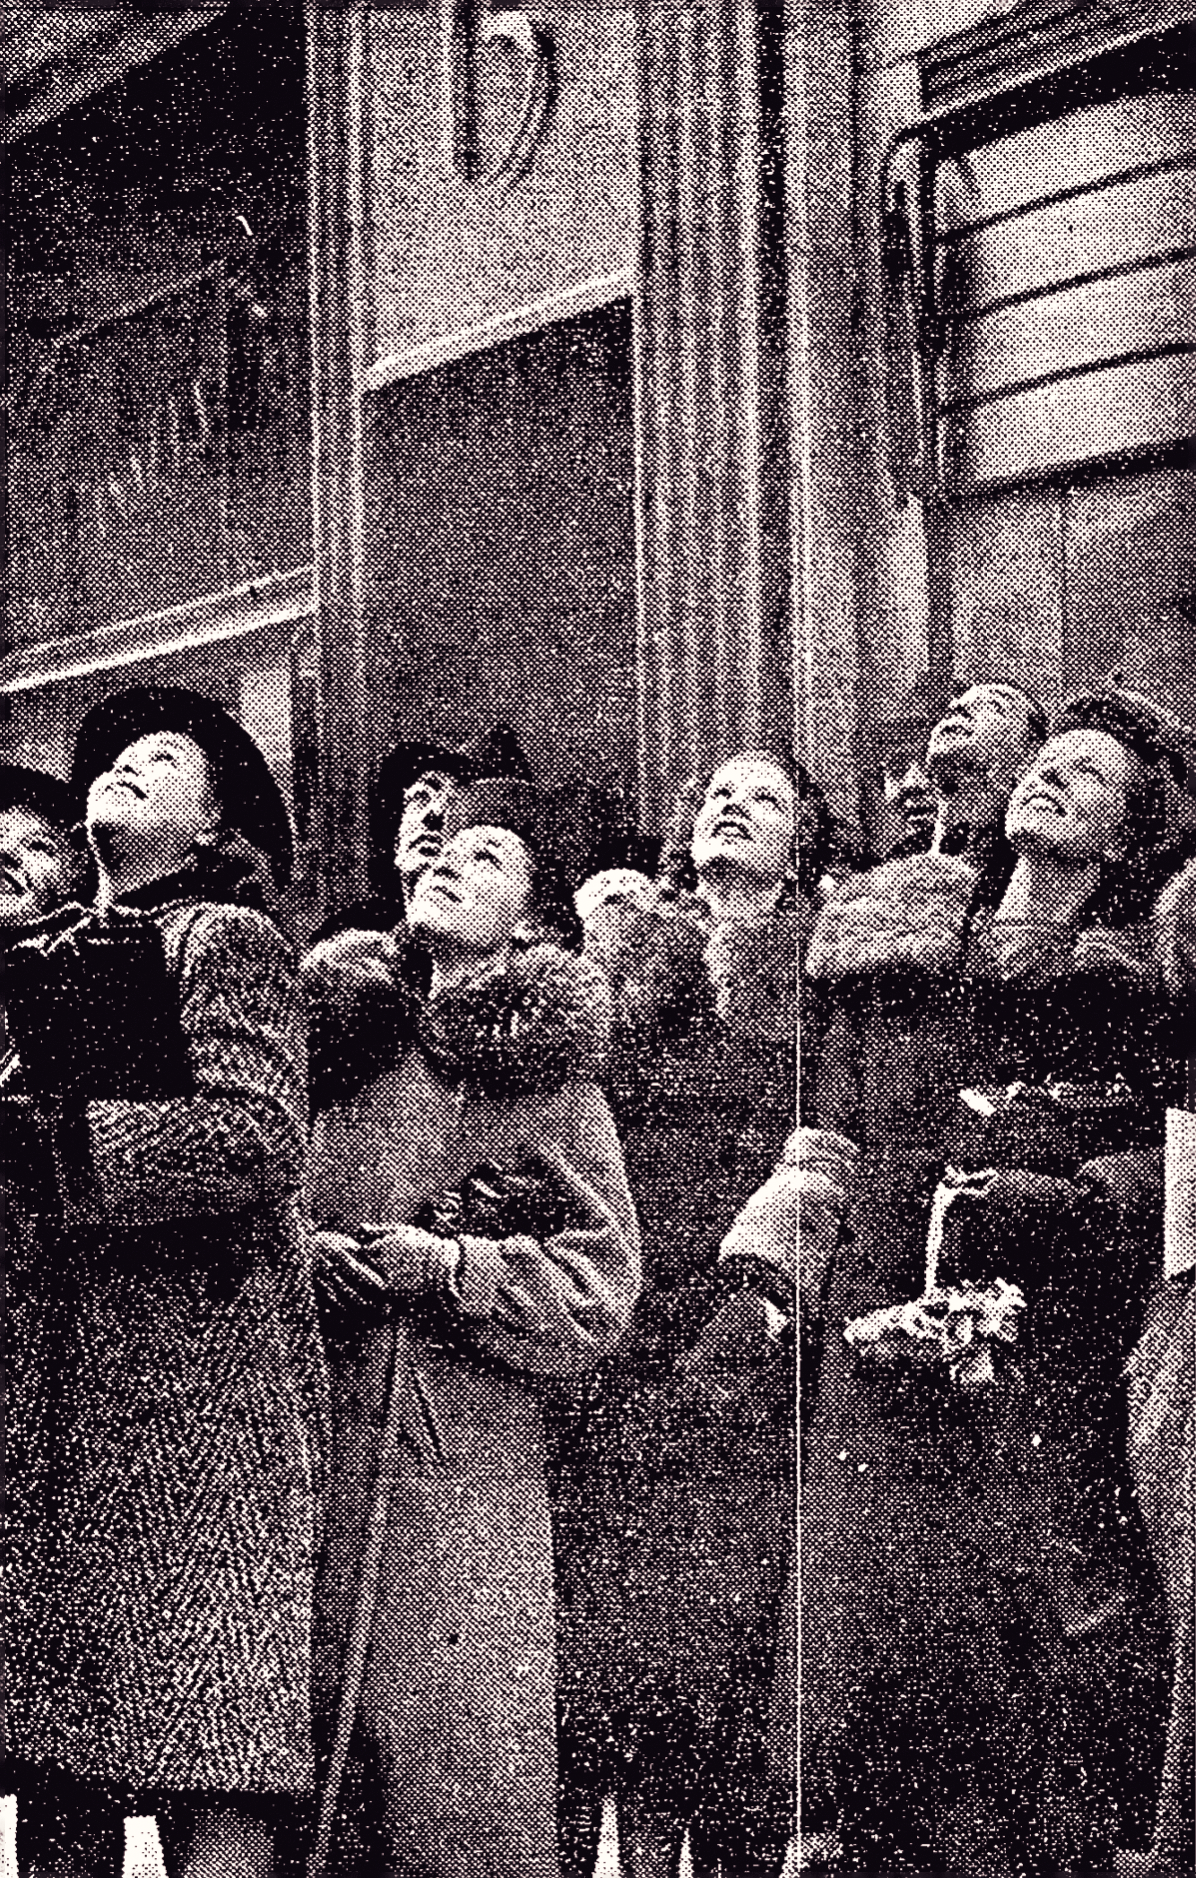 A crowd of people in winter coats look upward expectantly.